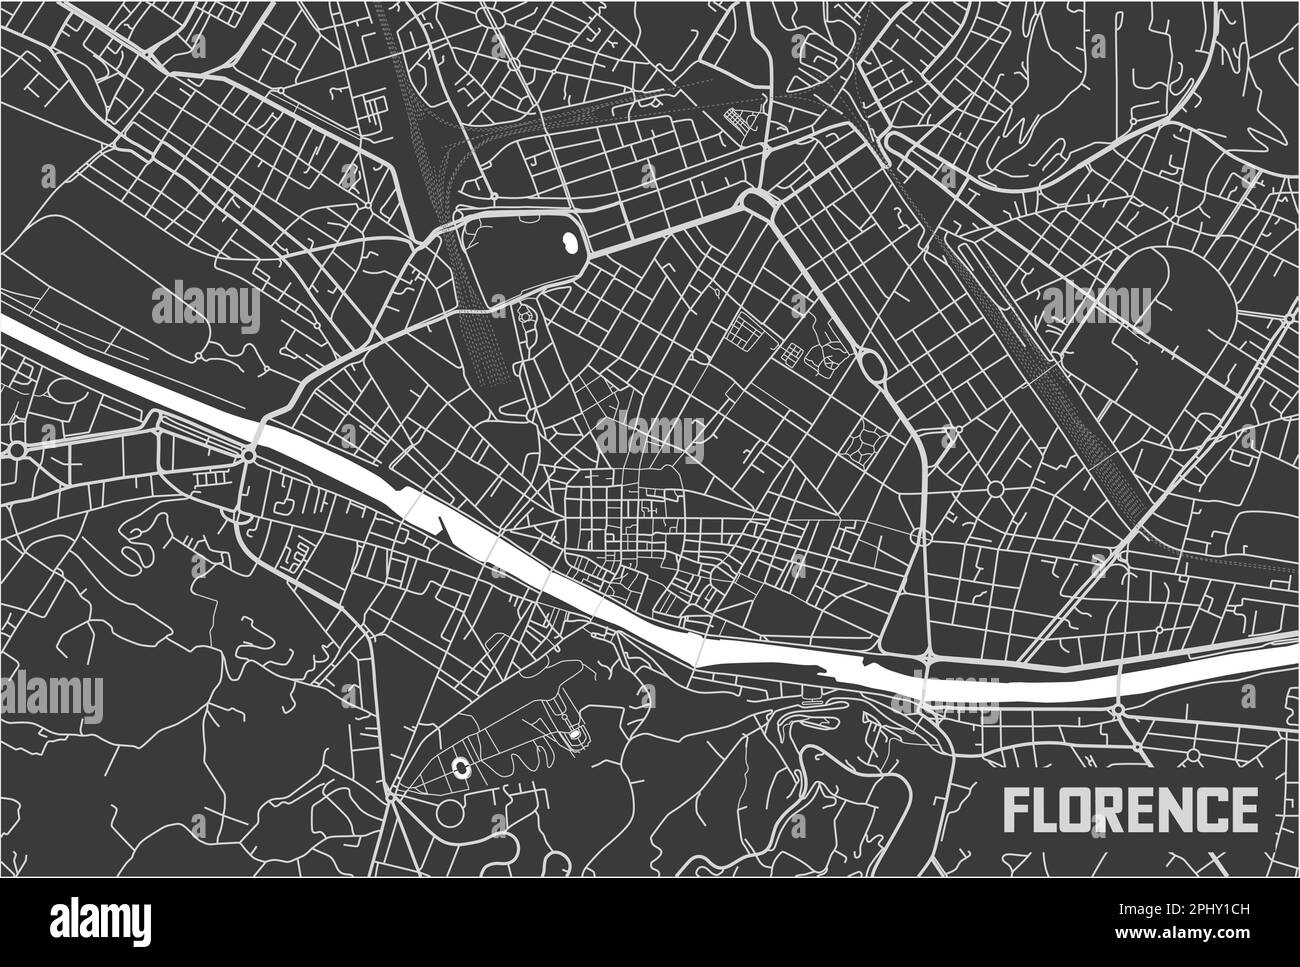 Minimalistic Florence city map poster design. Stock Vector